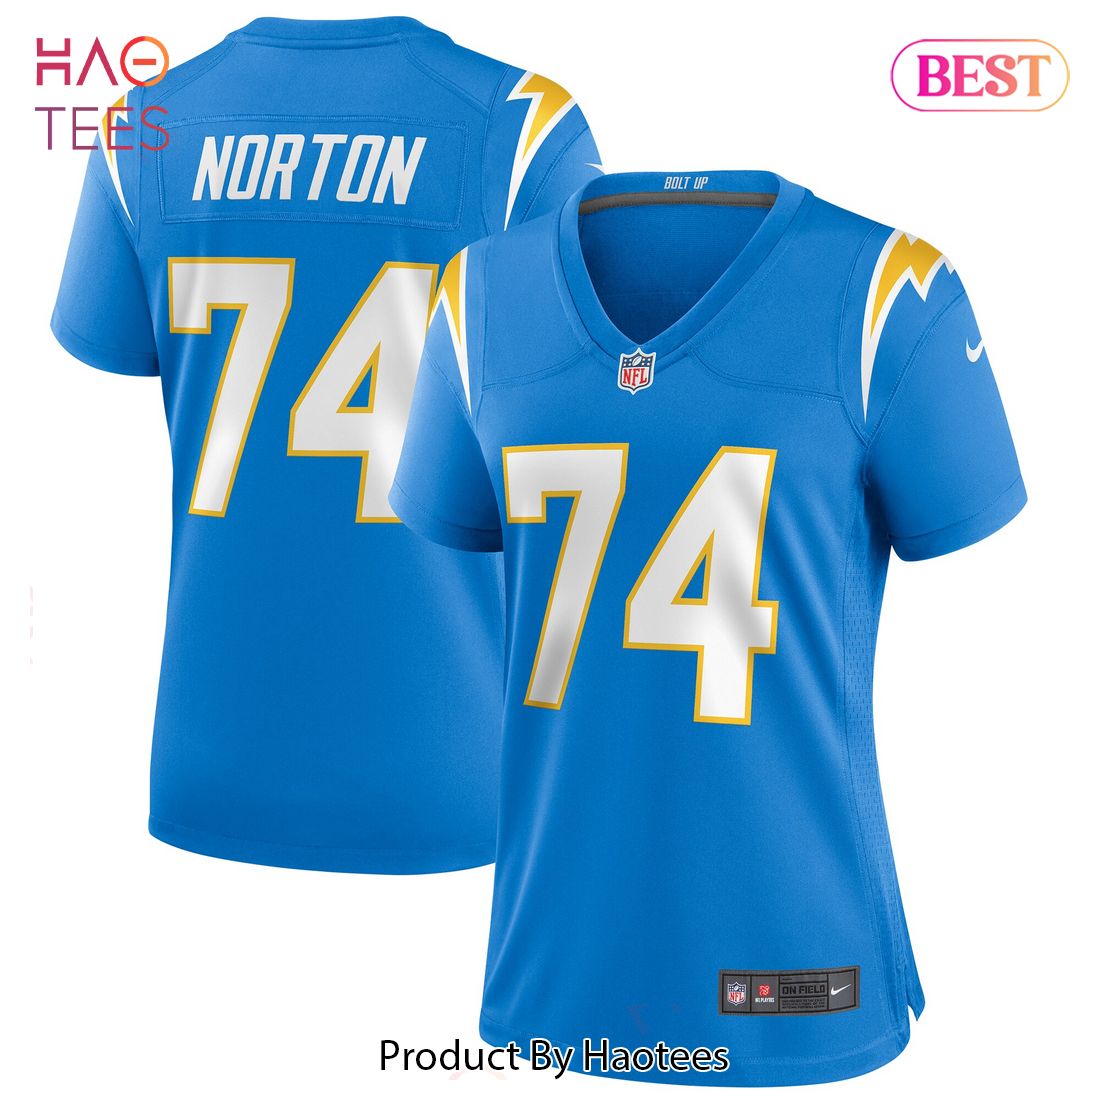 Storm Norton Los Angeles Chargers Nike Women's Game Jersey Powder Blue